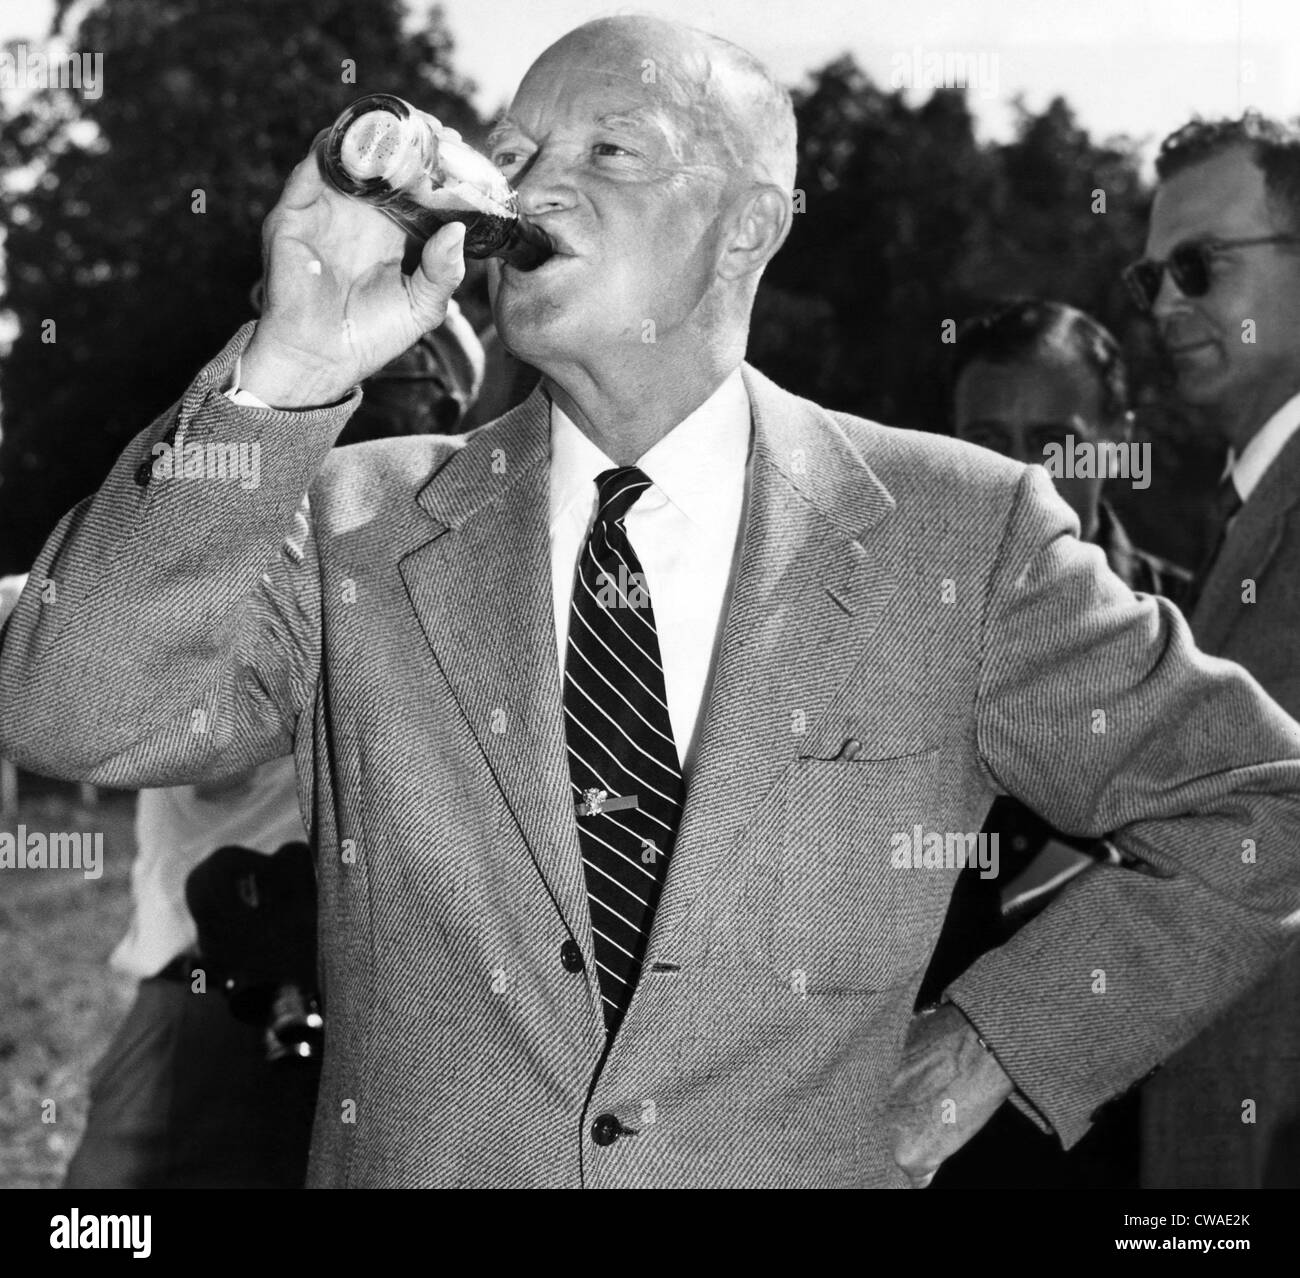 President Dwight D. Eisenhower downing a soft drink, September 13, 1953. Courtesy CSU Archives/Everett Collection. Stock Photo